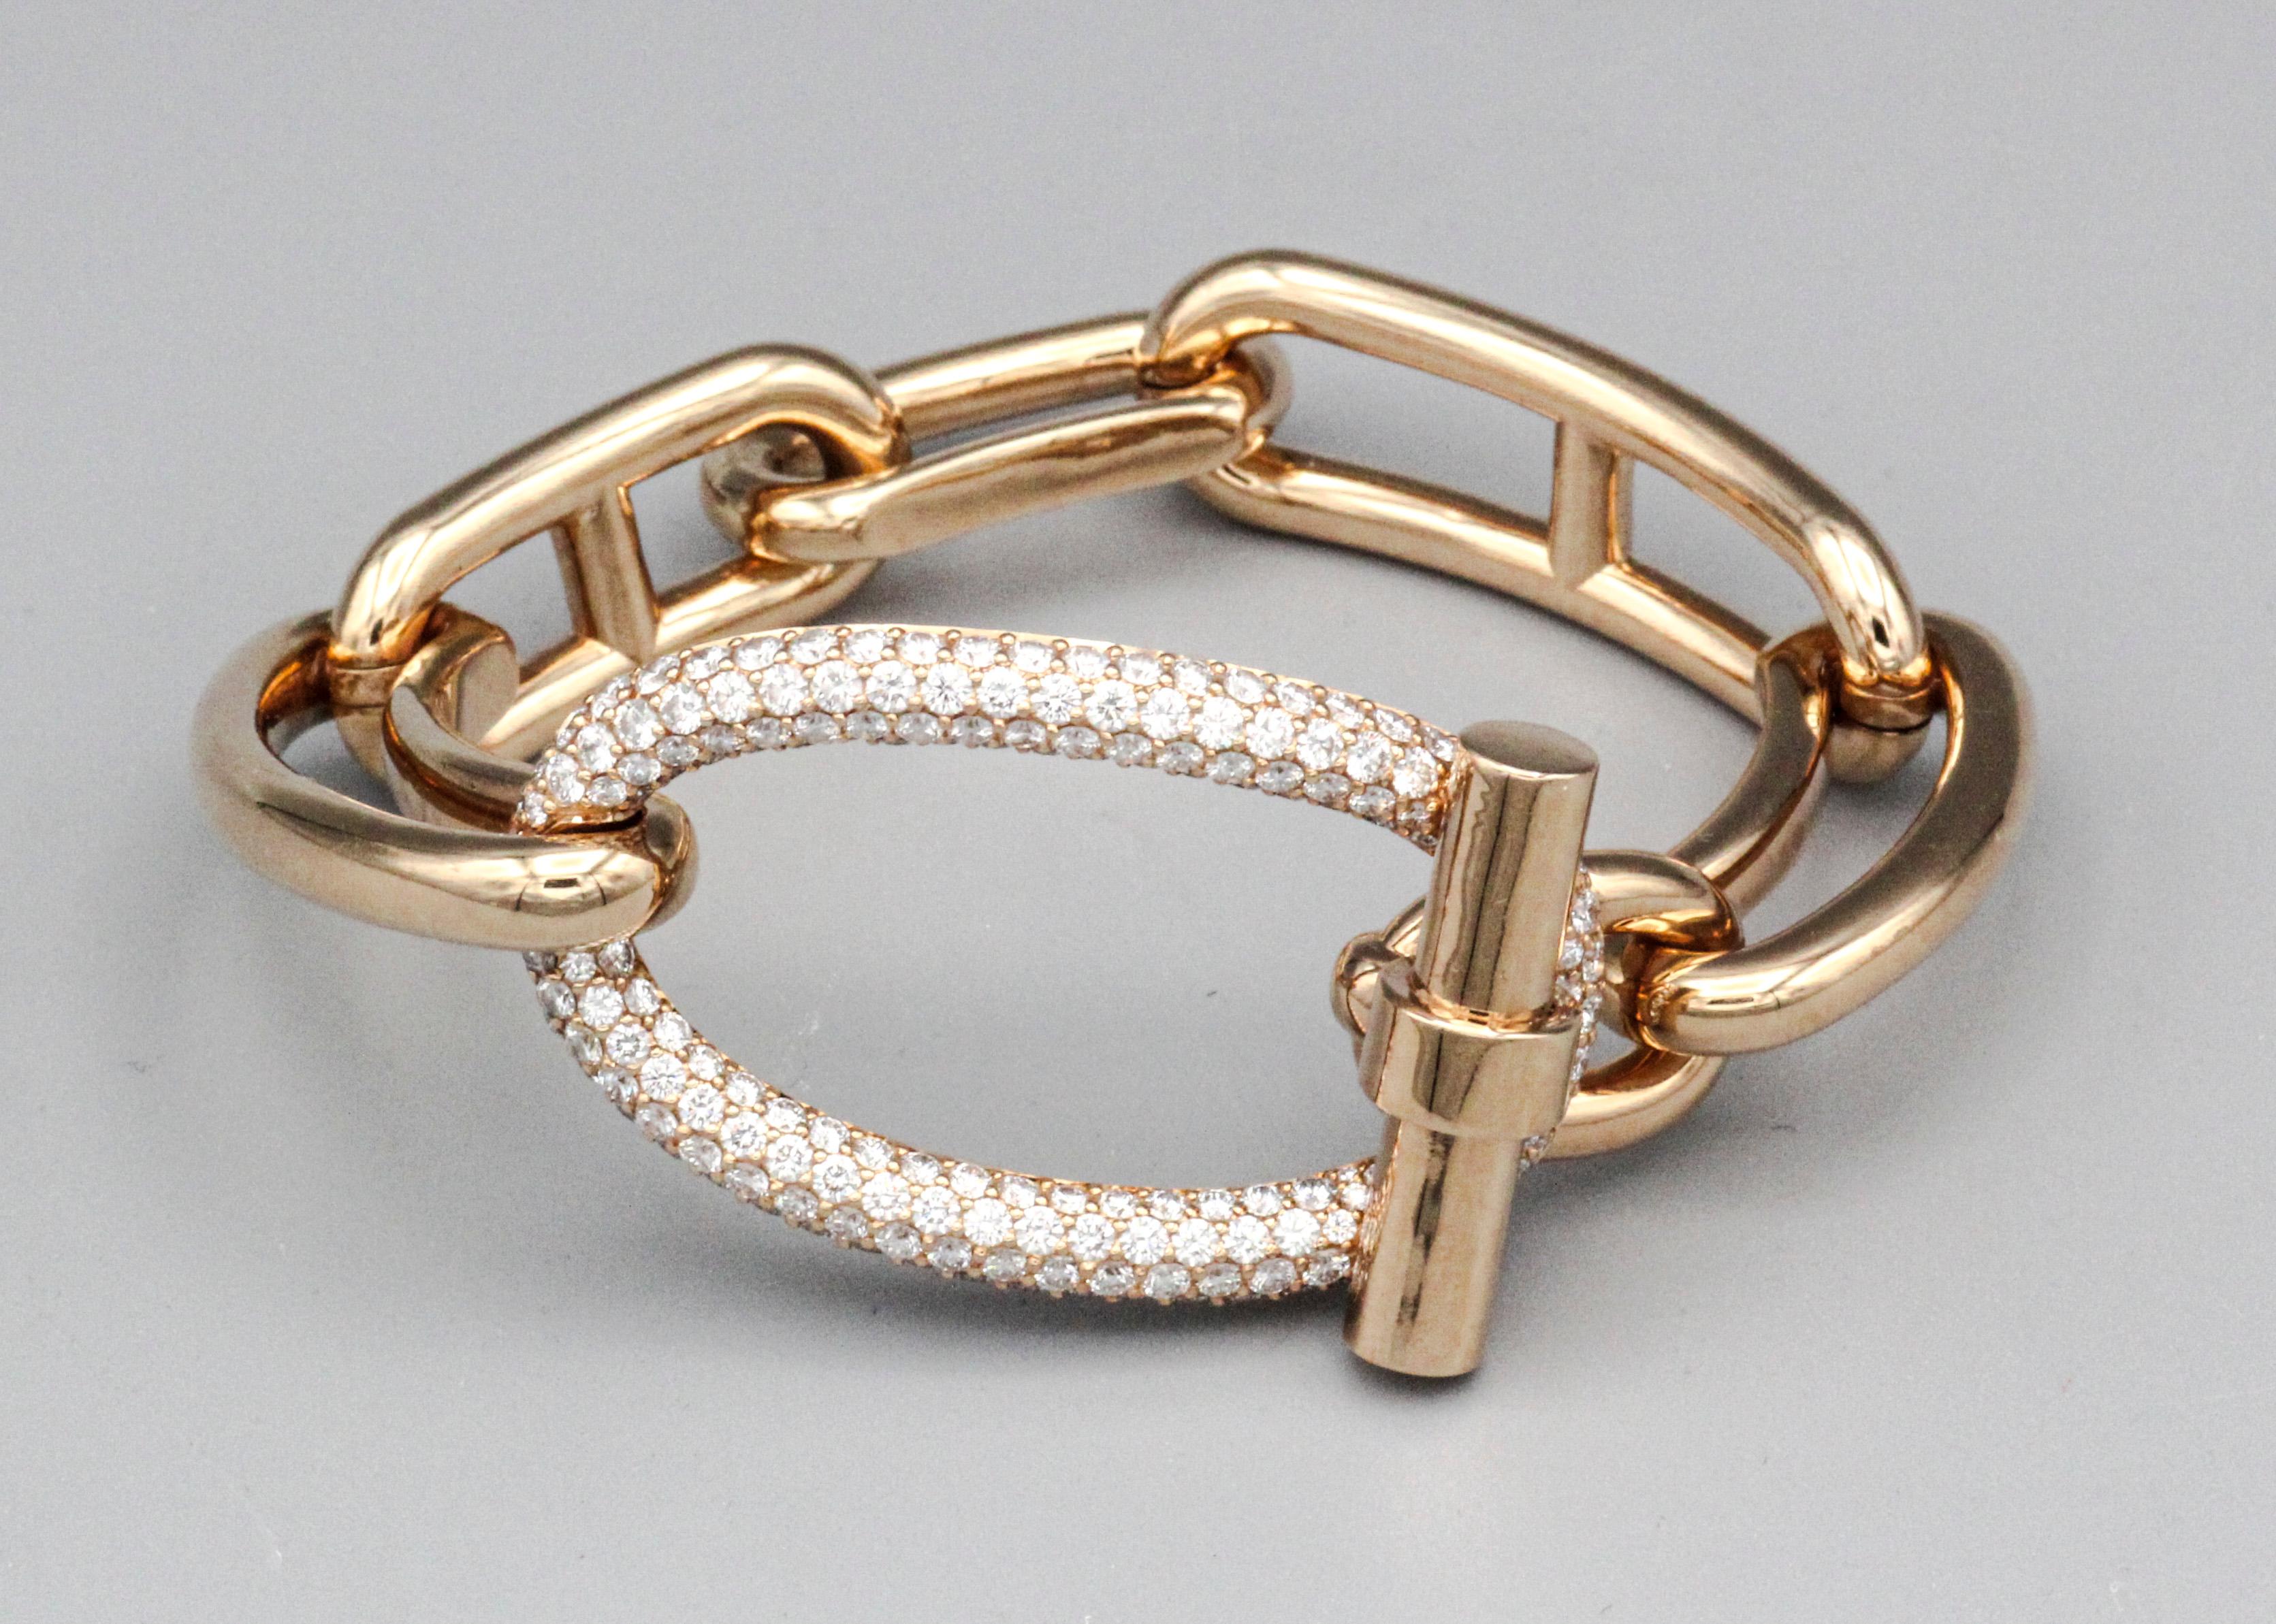 Embrace Opulent Elegance: Hermès Adage Pave Diamond 18 Karat Rose Gold Bracelet

Immerse yourself in luxury with the captivating Hermès Adage Pave Diamond 18 Karat Rose Gold Bracelet. This exquisite piece transcends mere jewelry; it's a shimmering